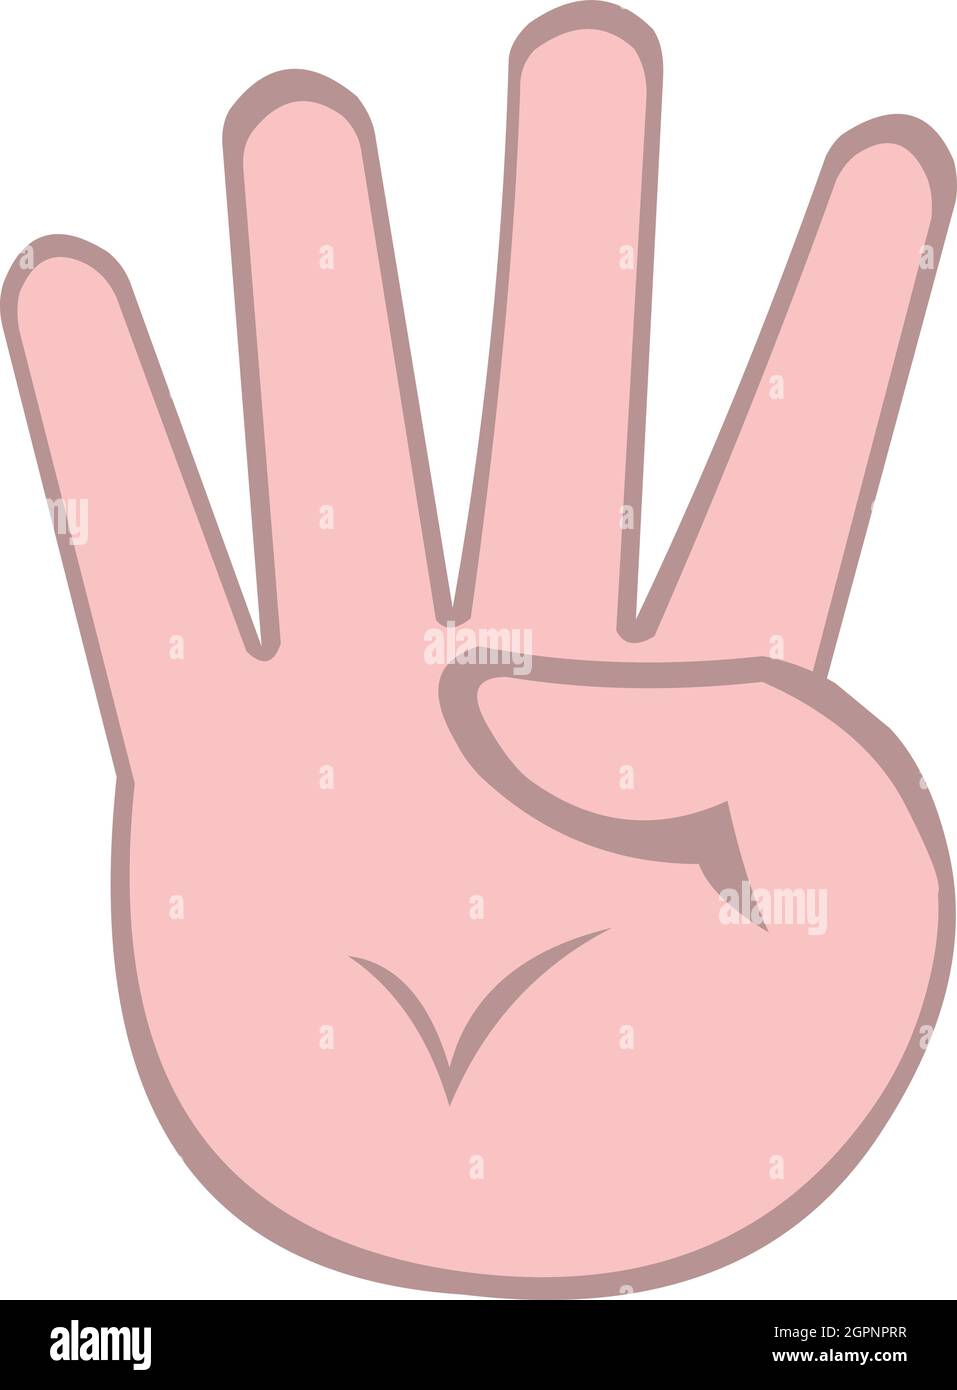 Vector emoticon illustration of a cartoon hand counting to the number four Stock Vector